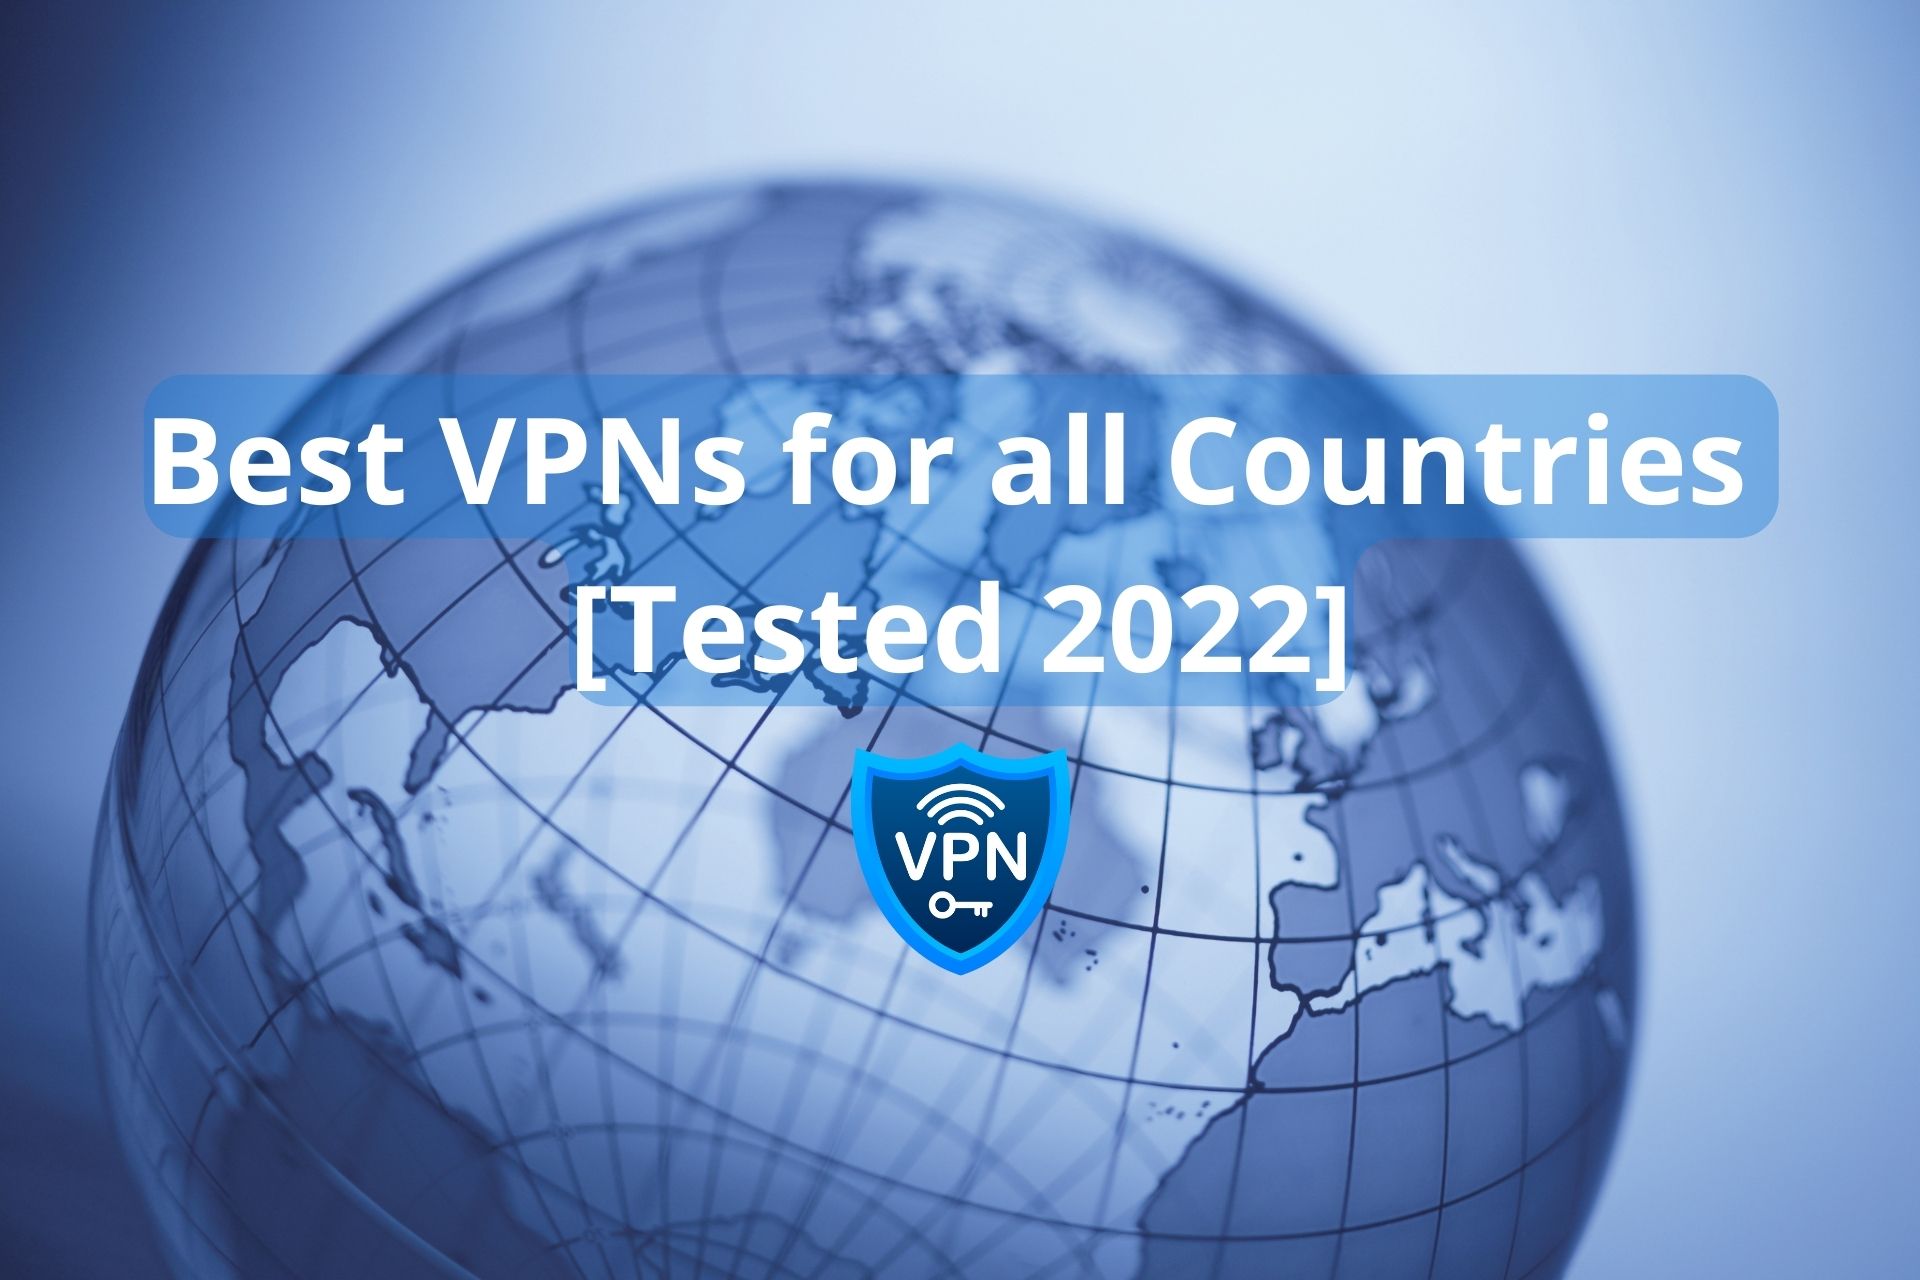 Best VPNs for all Countries [Tested 2022]